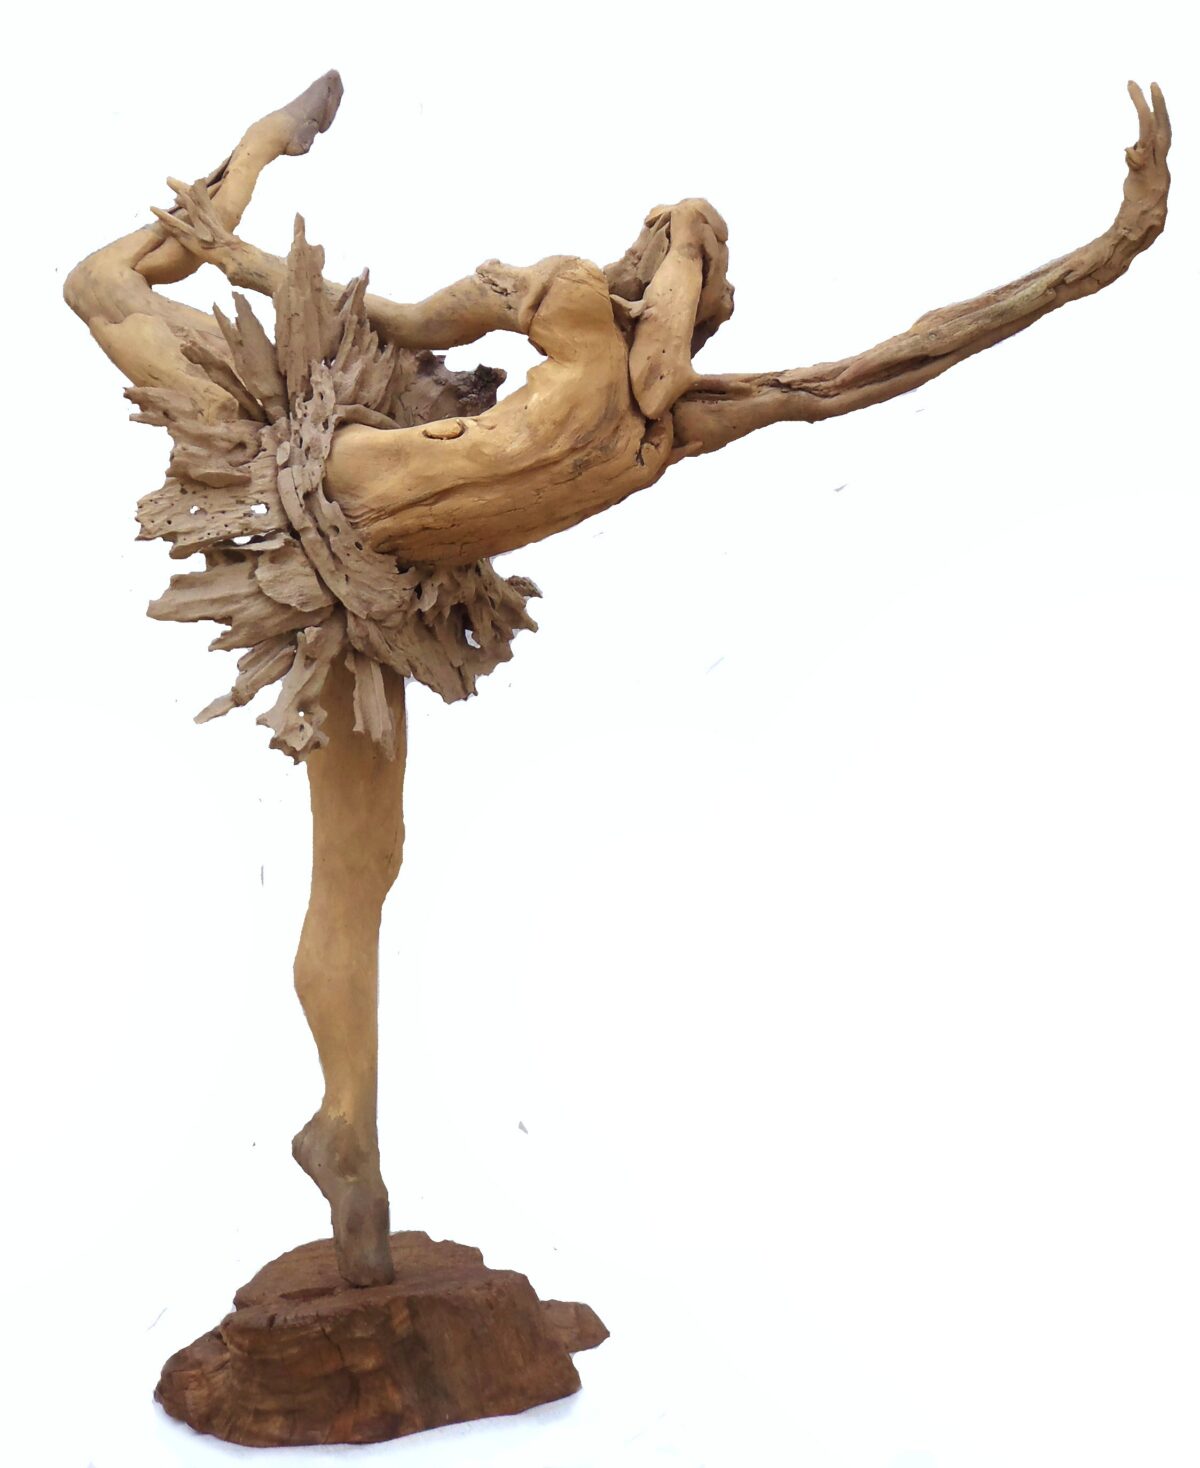 Outstanding Figurative Driftwood Sculptures By Tony Fredriksson 12